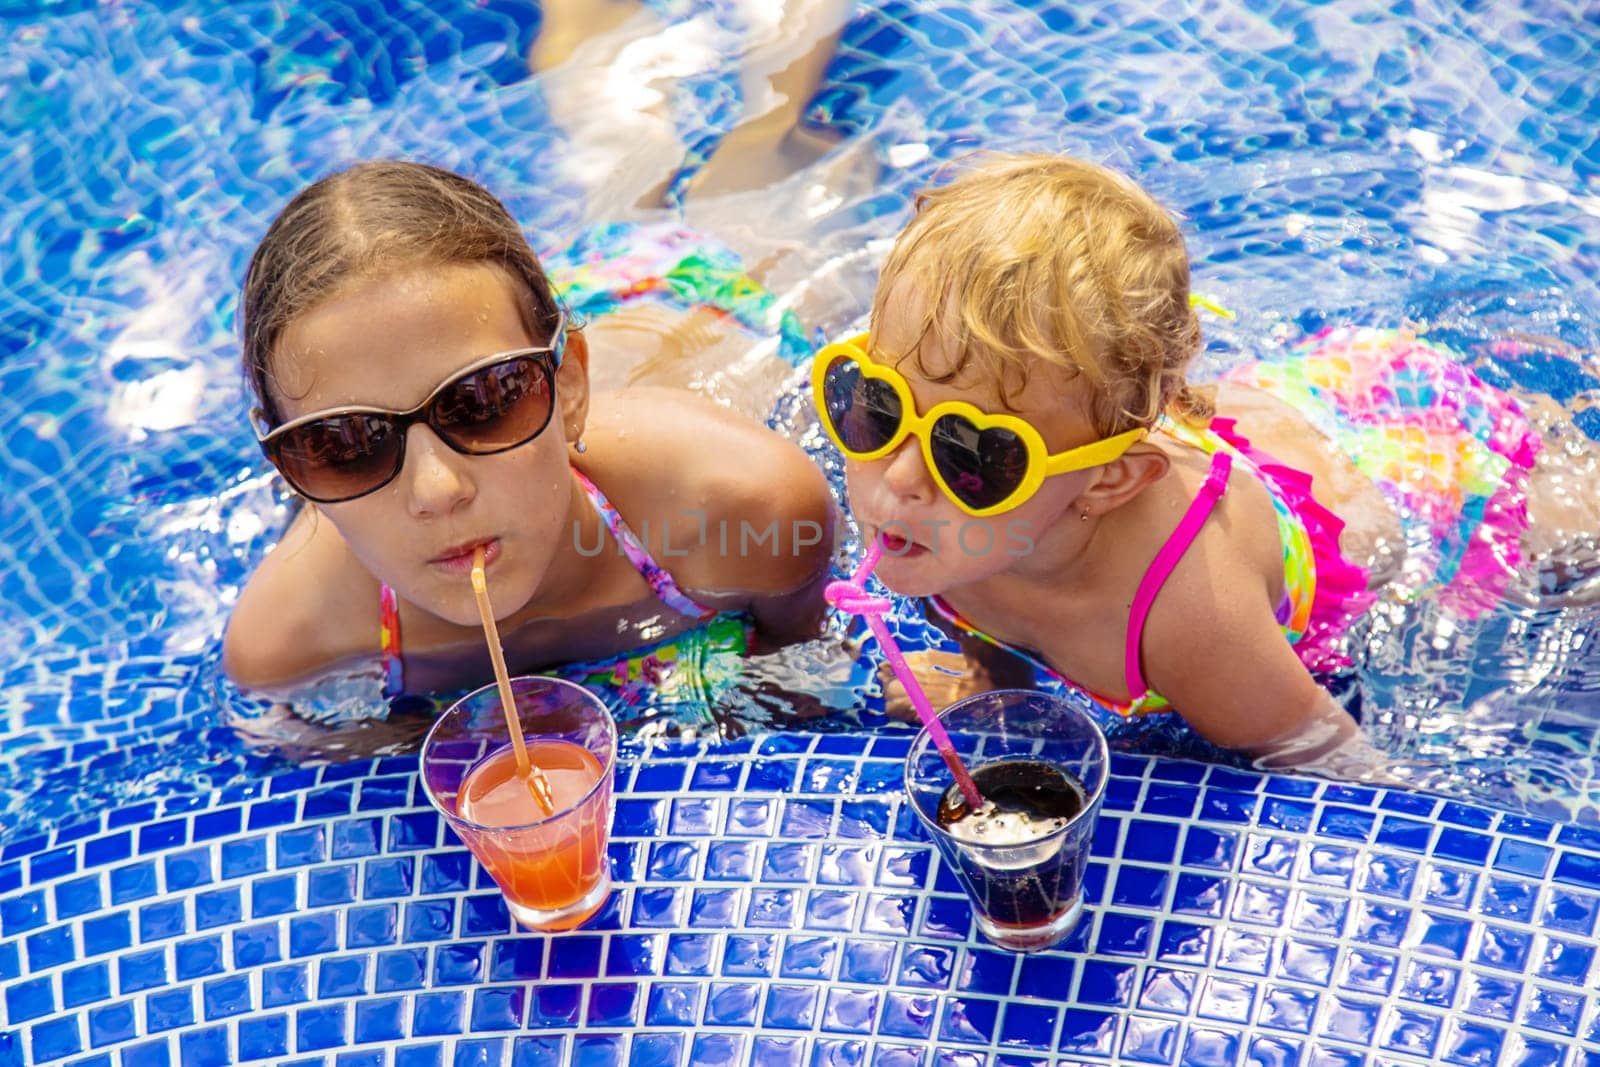 Children drink a cocktail in the pool. Selective focus. Kids.